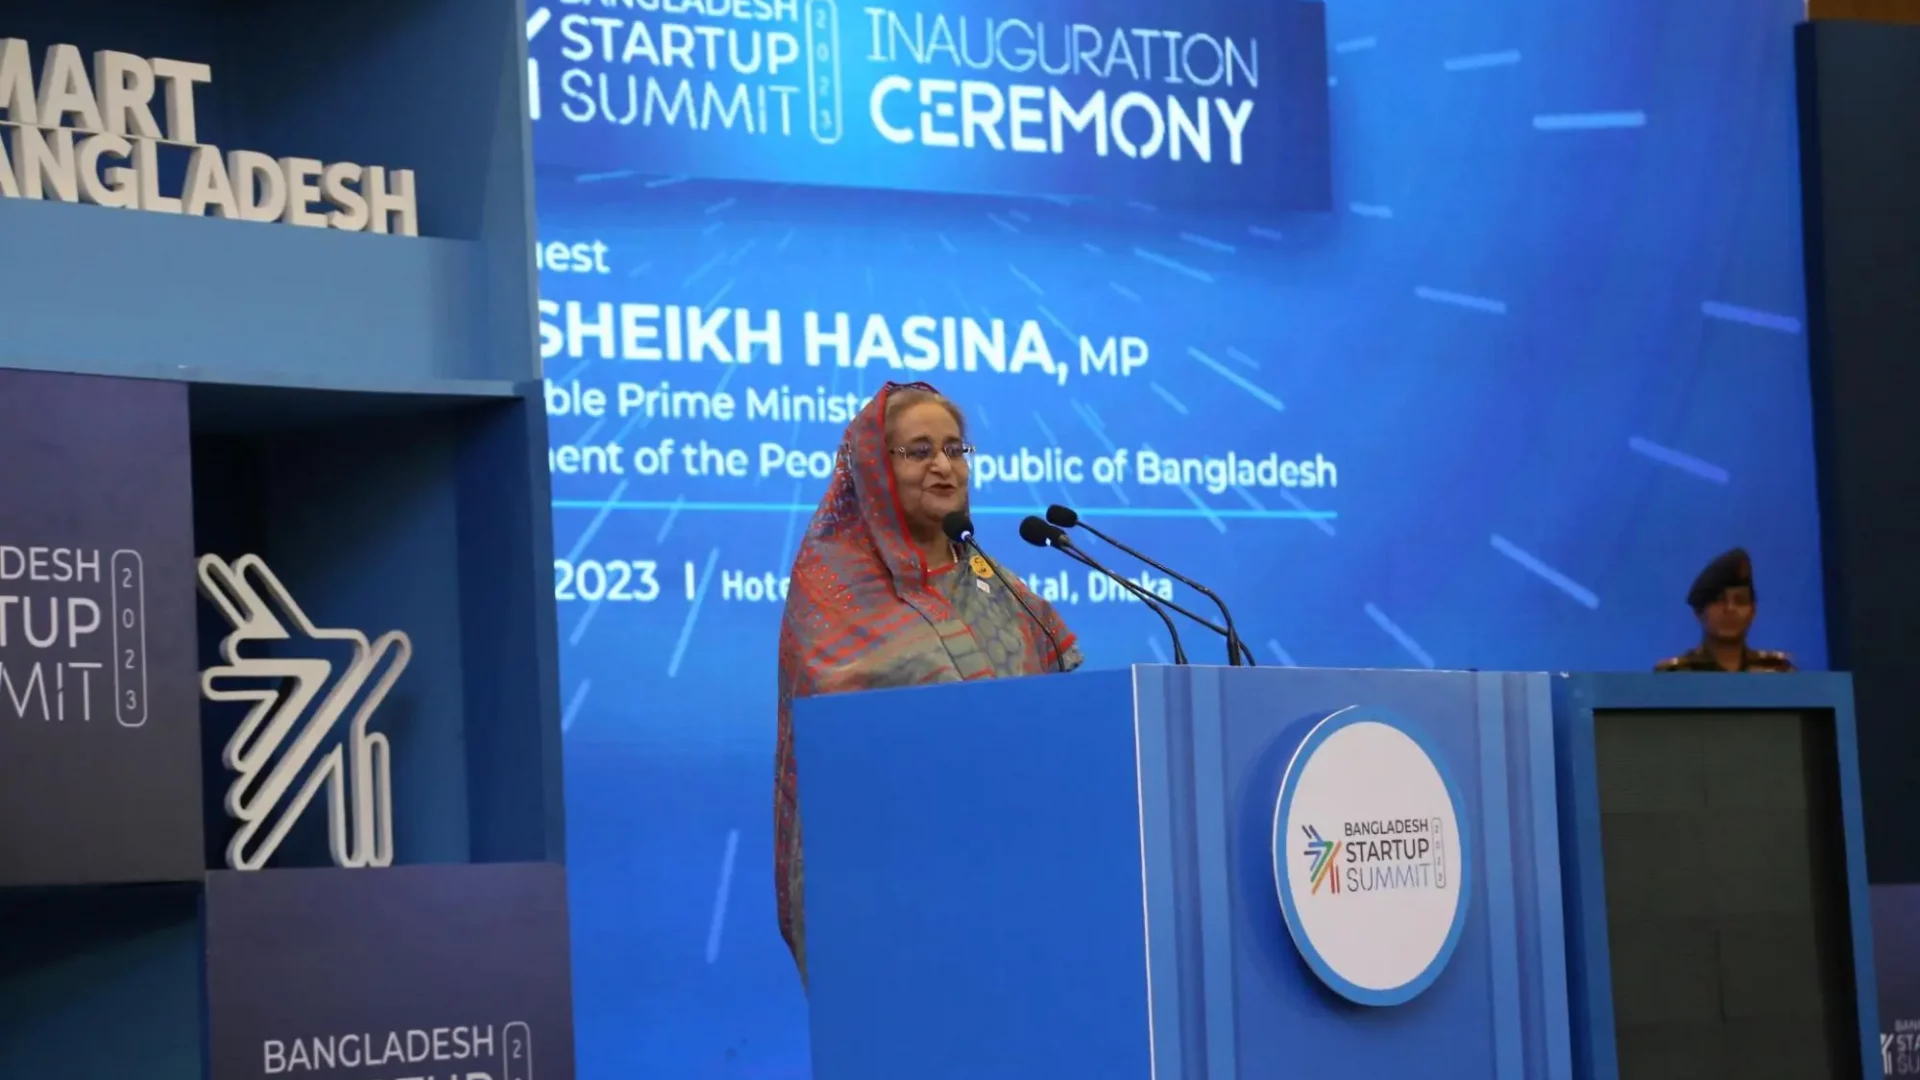 H.E. Honorouble Prime Minister Sheikh Hasina spoke at the opening ceremony on the future of  the Smart Bangladesh vision.